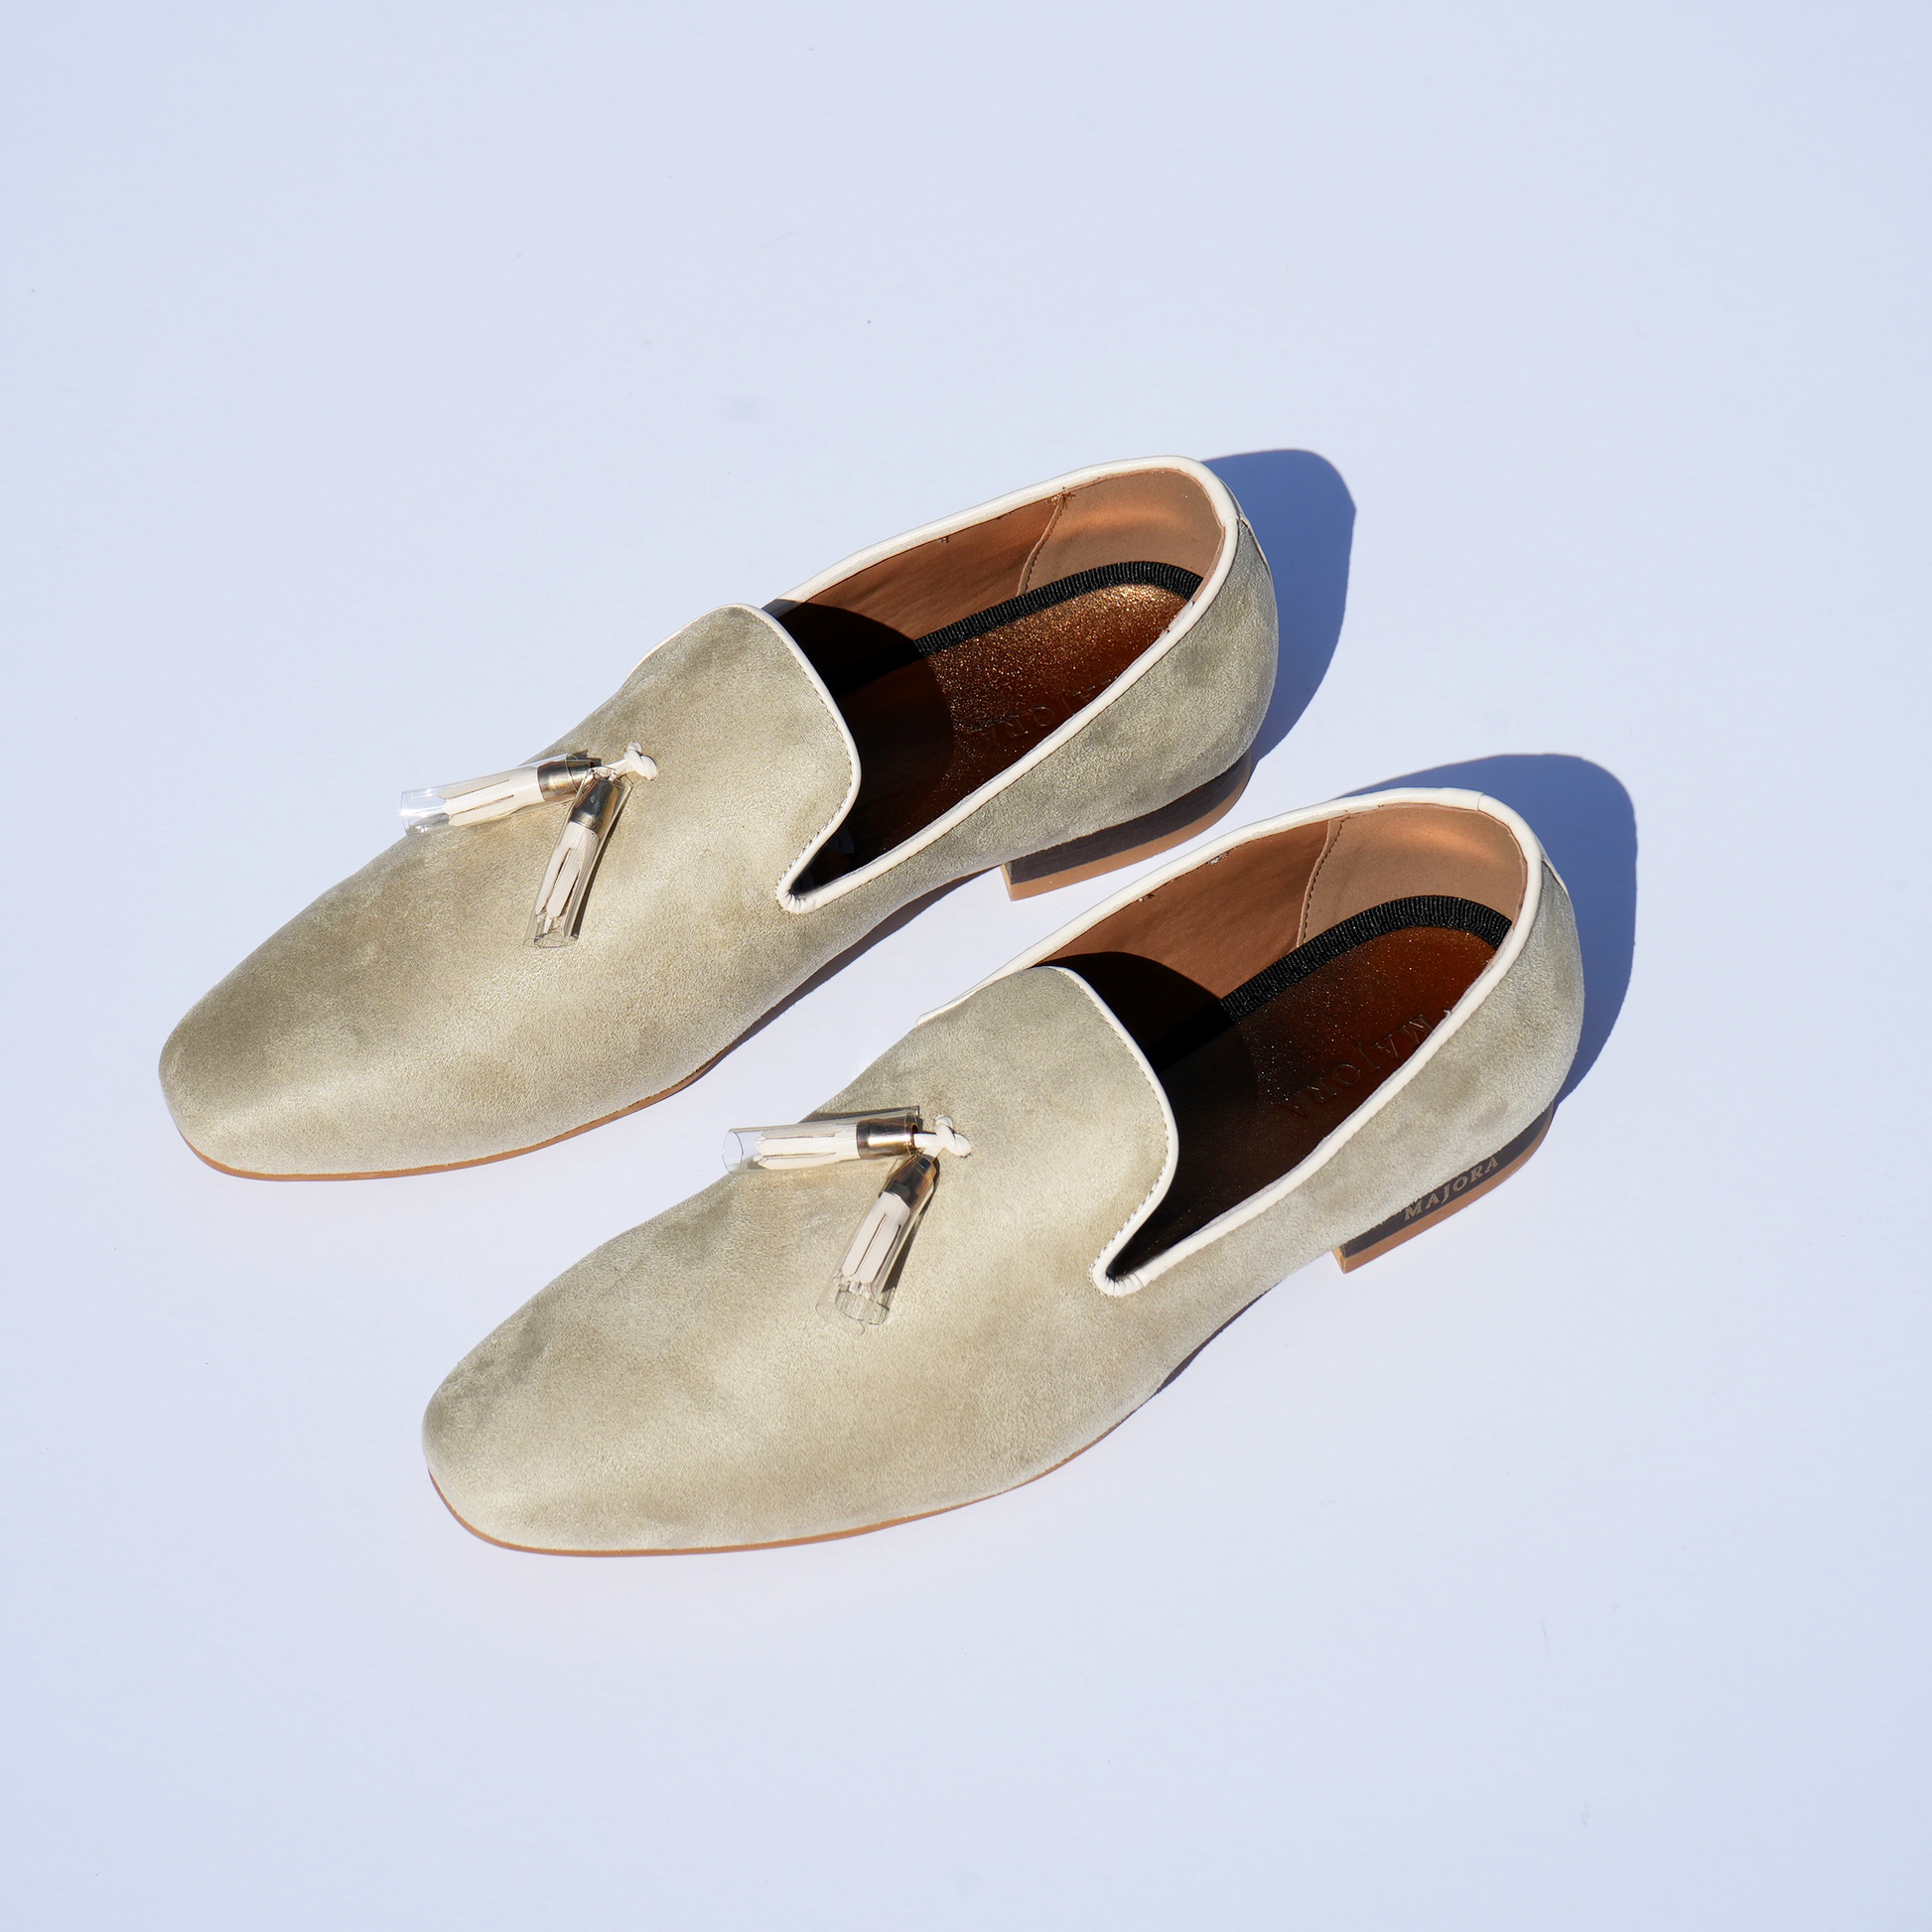 Cream suede men's Mojaris/Mojris with tassels, featuring gold insoles and embossed Majora logo, captured in sunlight.